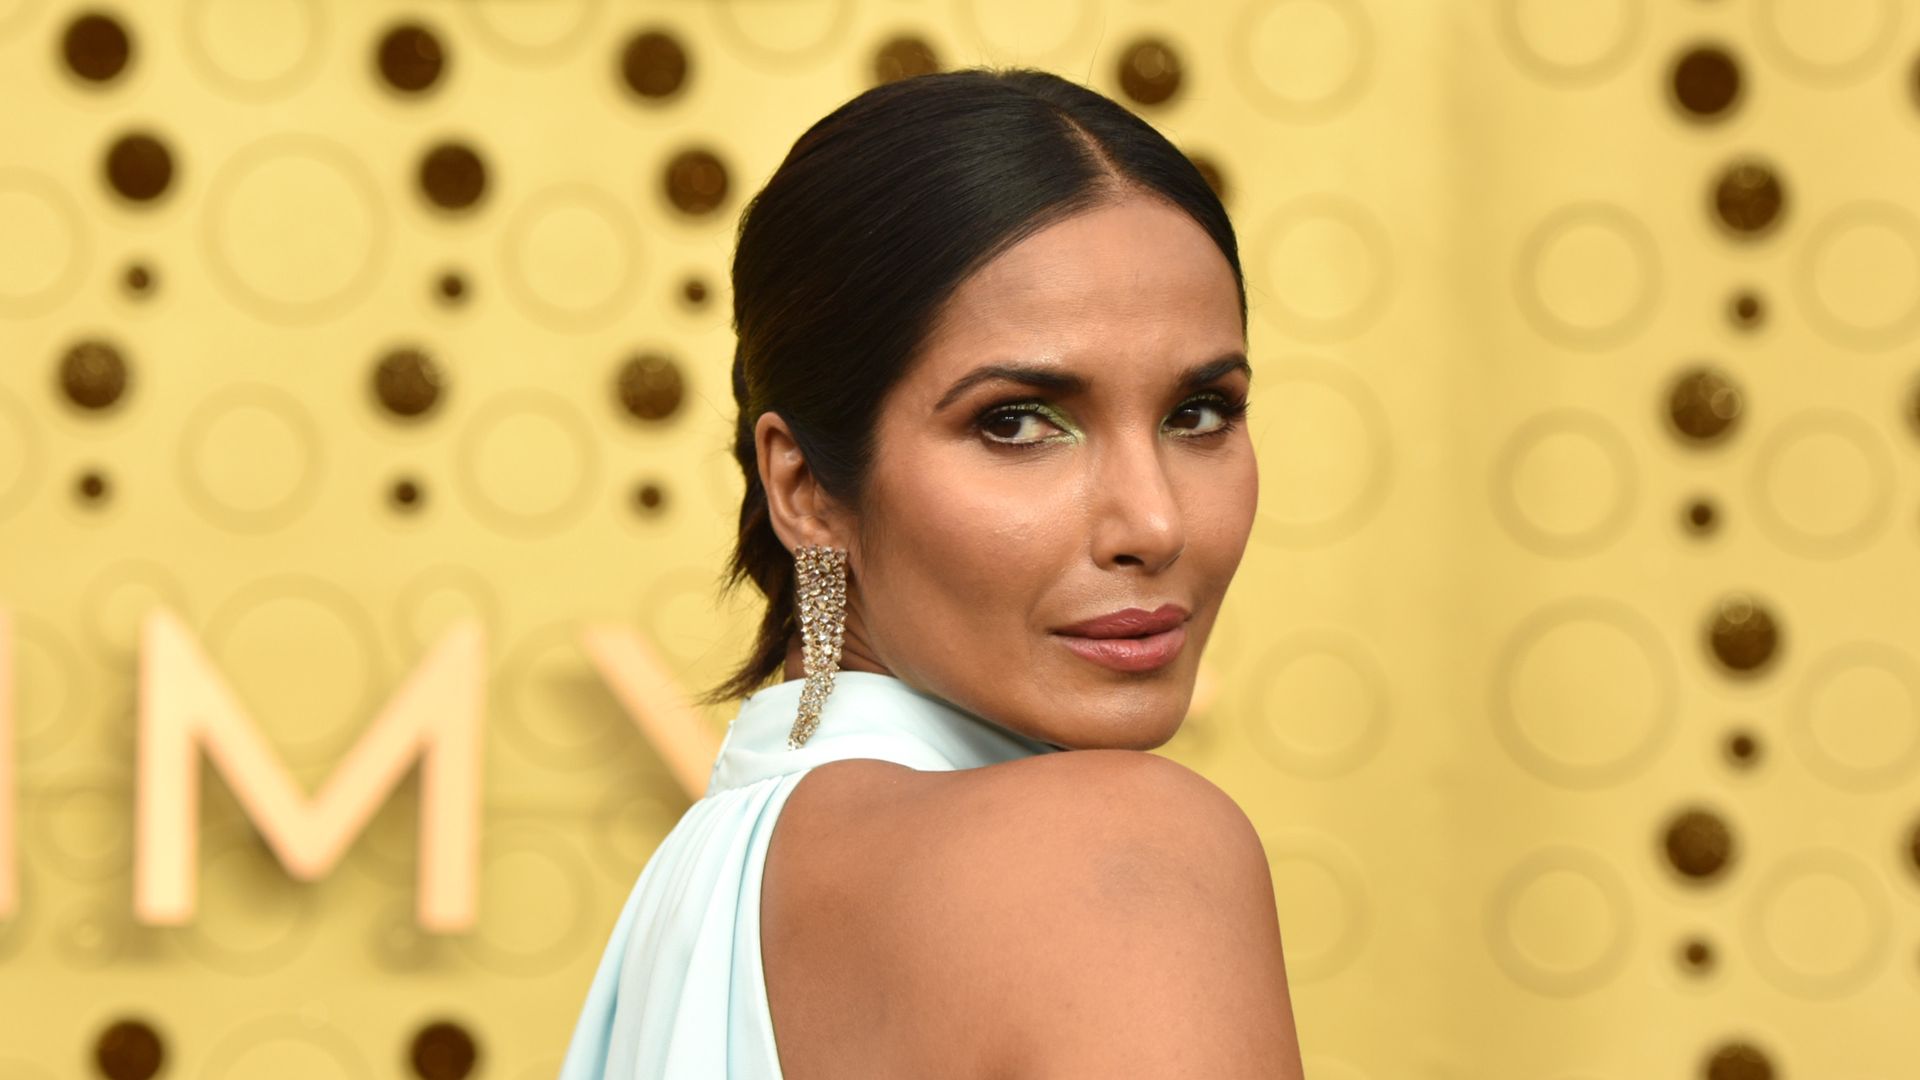 Padma Lakshmi attends the 71st Emmy Awards at Microsoft Theater